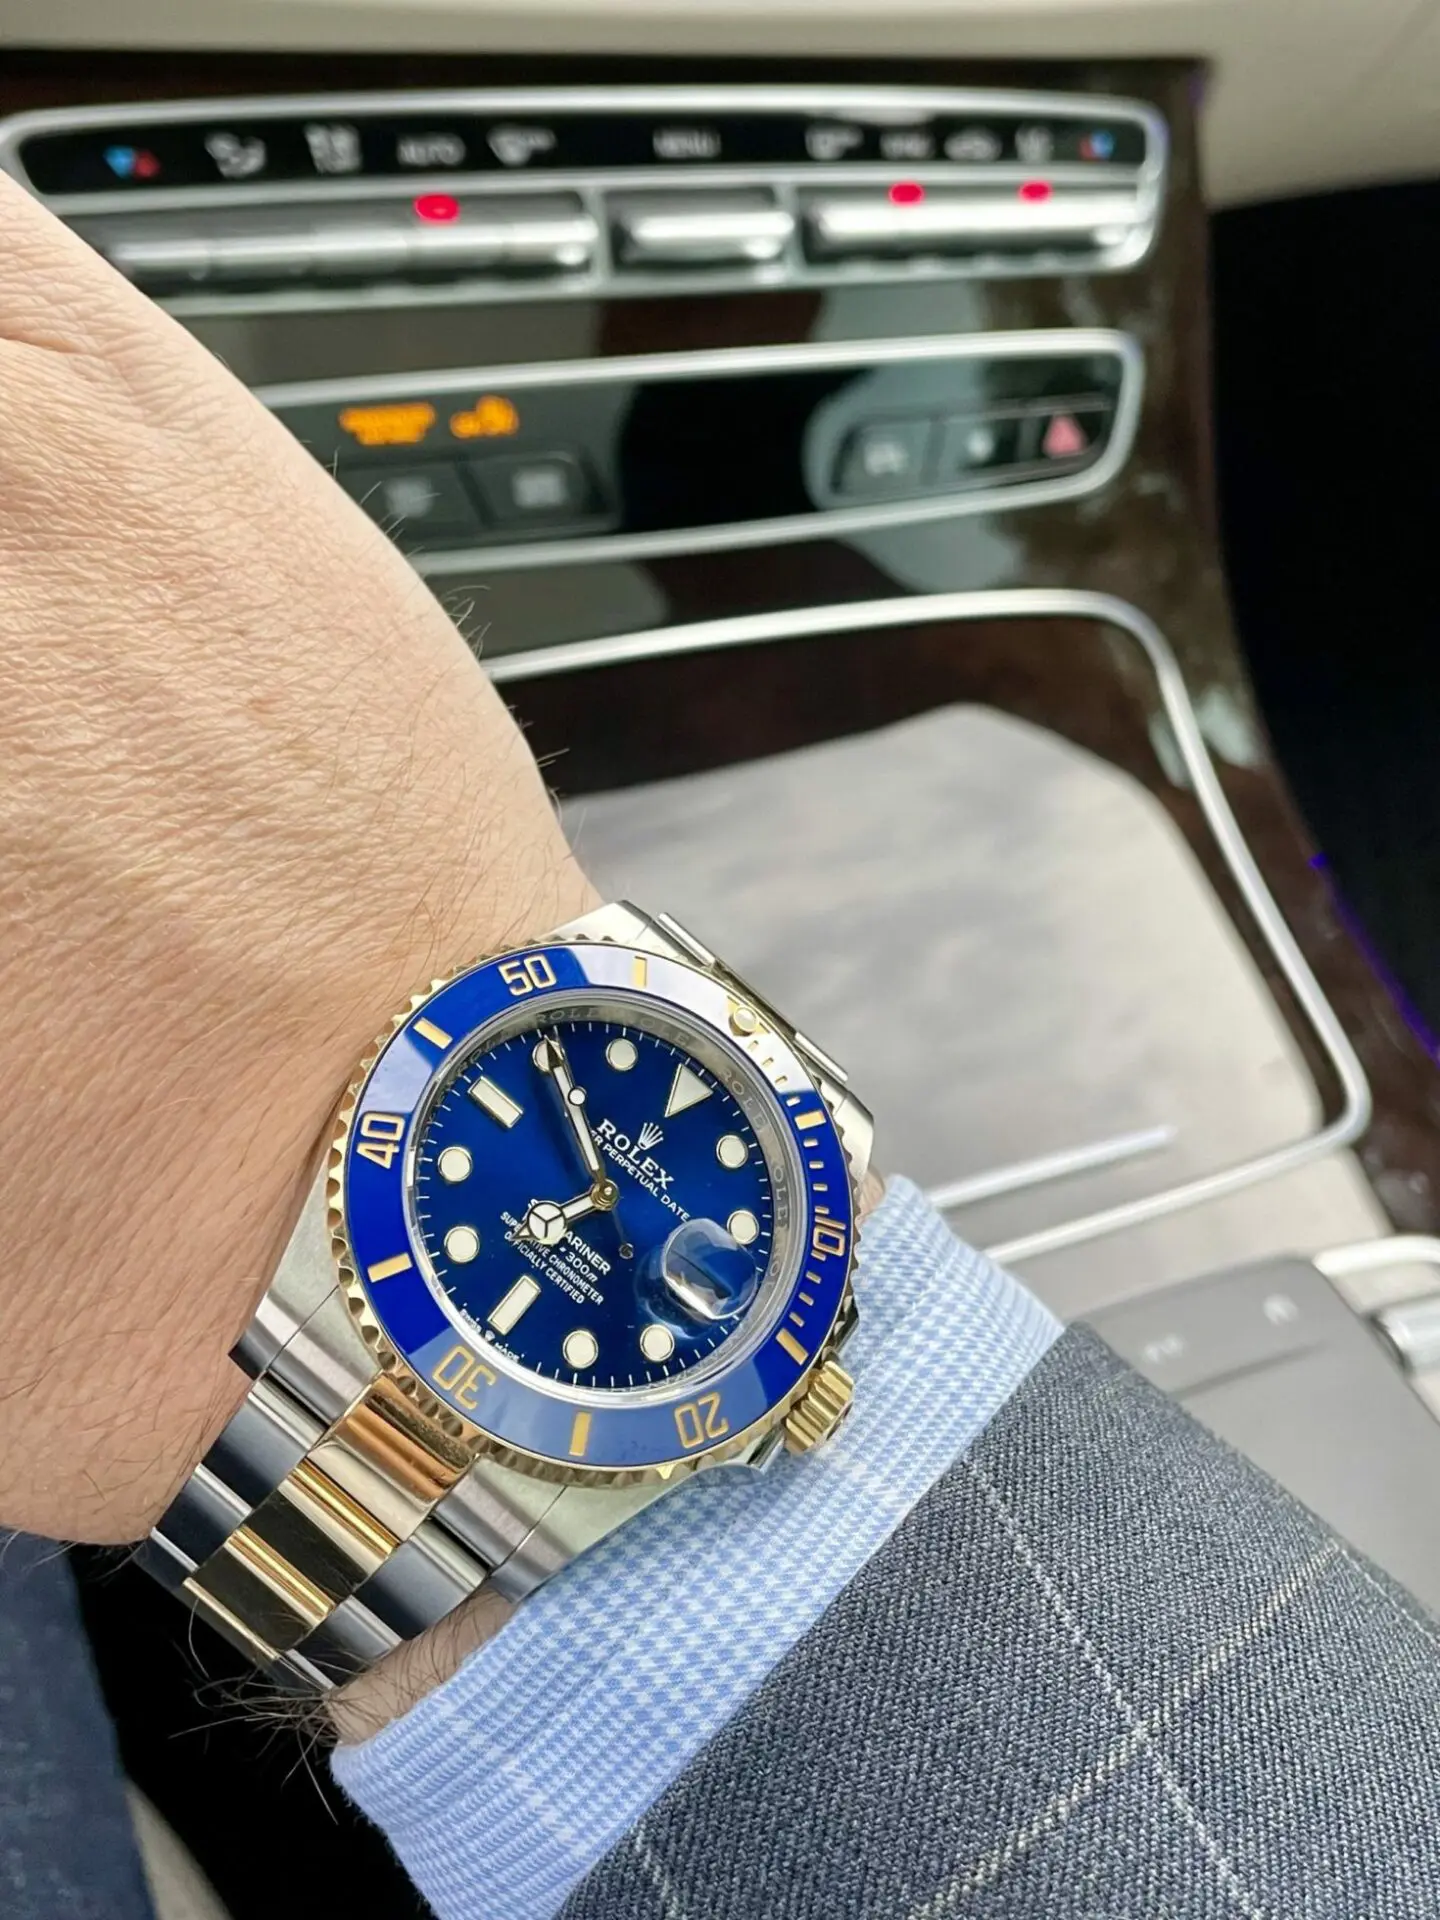 Why I bought the Rolex Submariner 126613LB